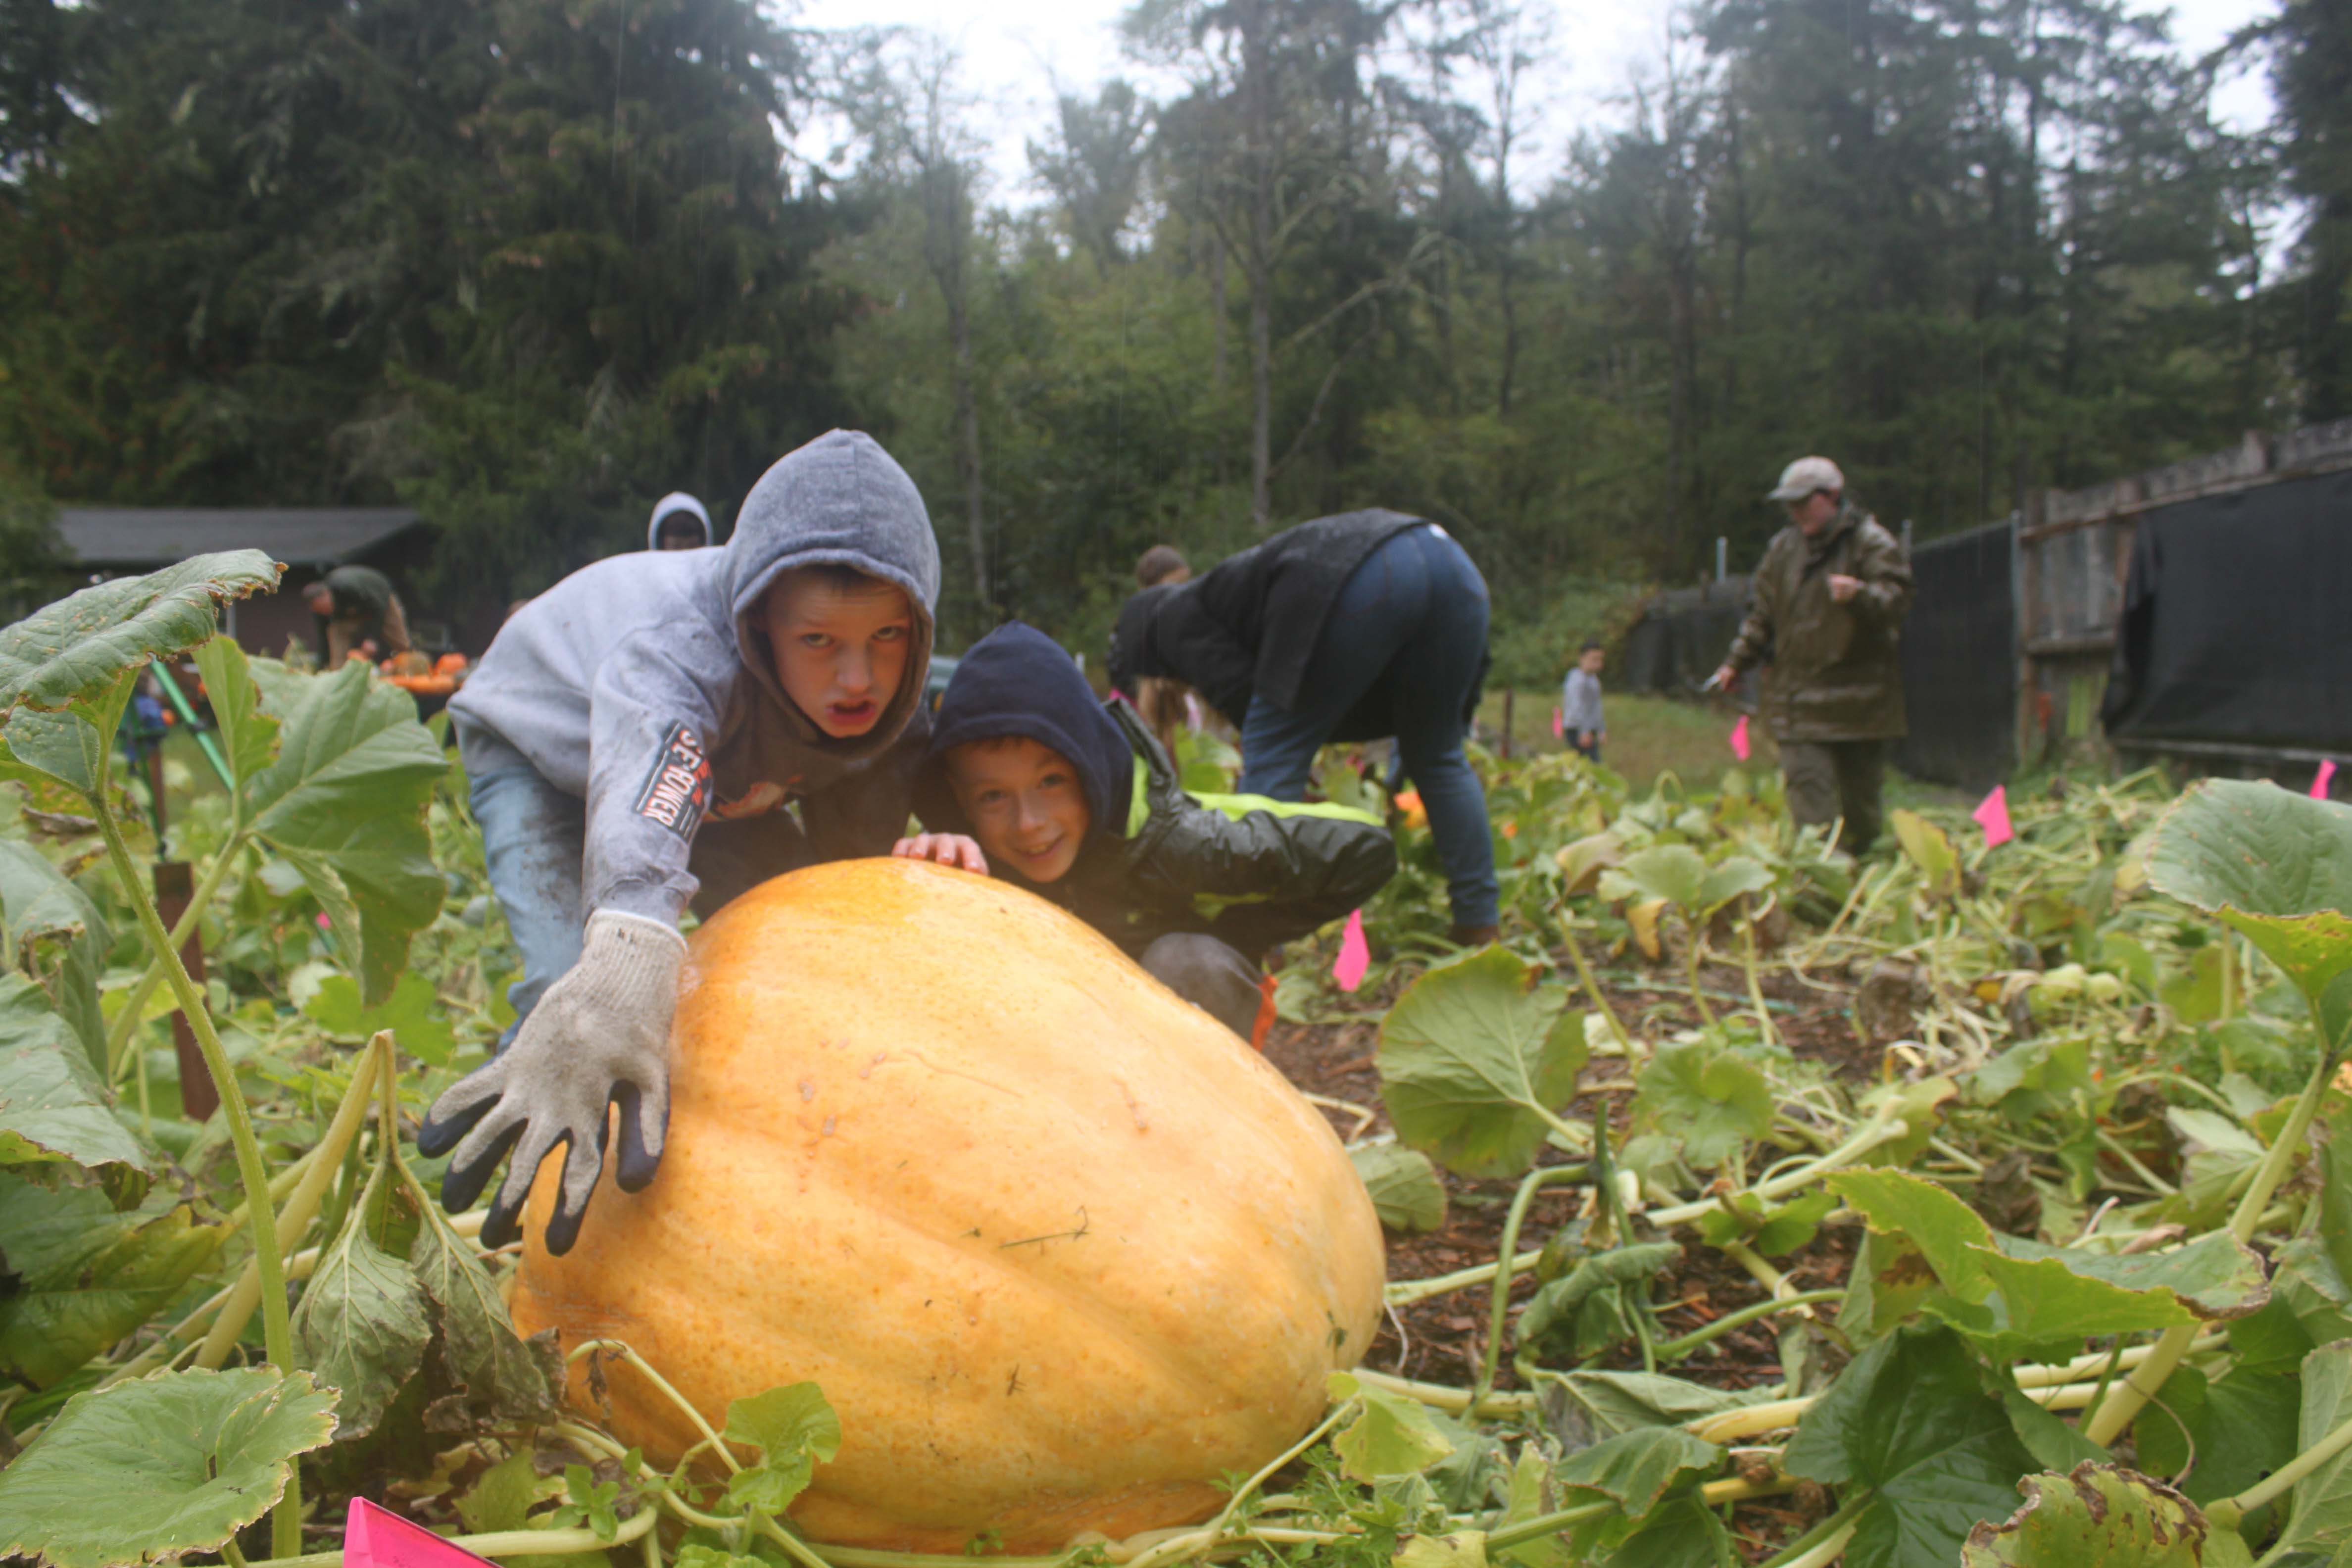 The biggest pumpkin in the patch - around 100lb.